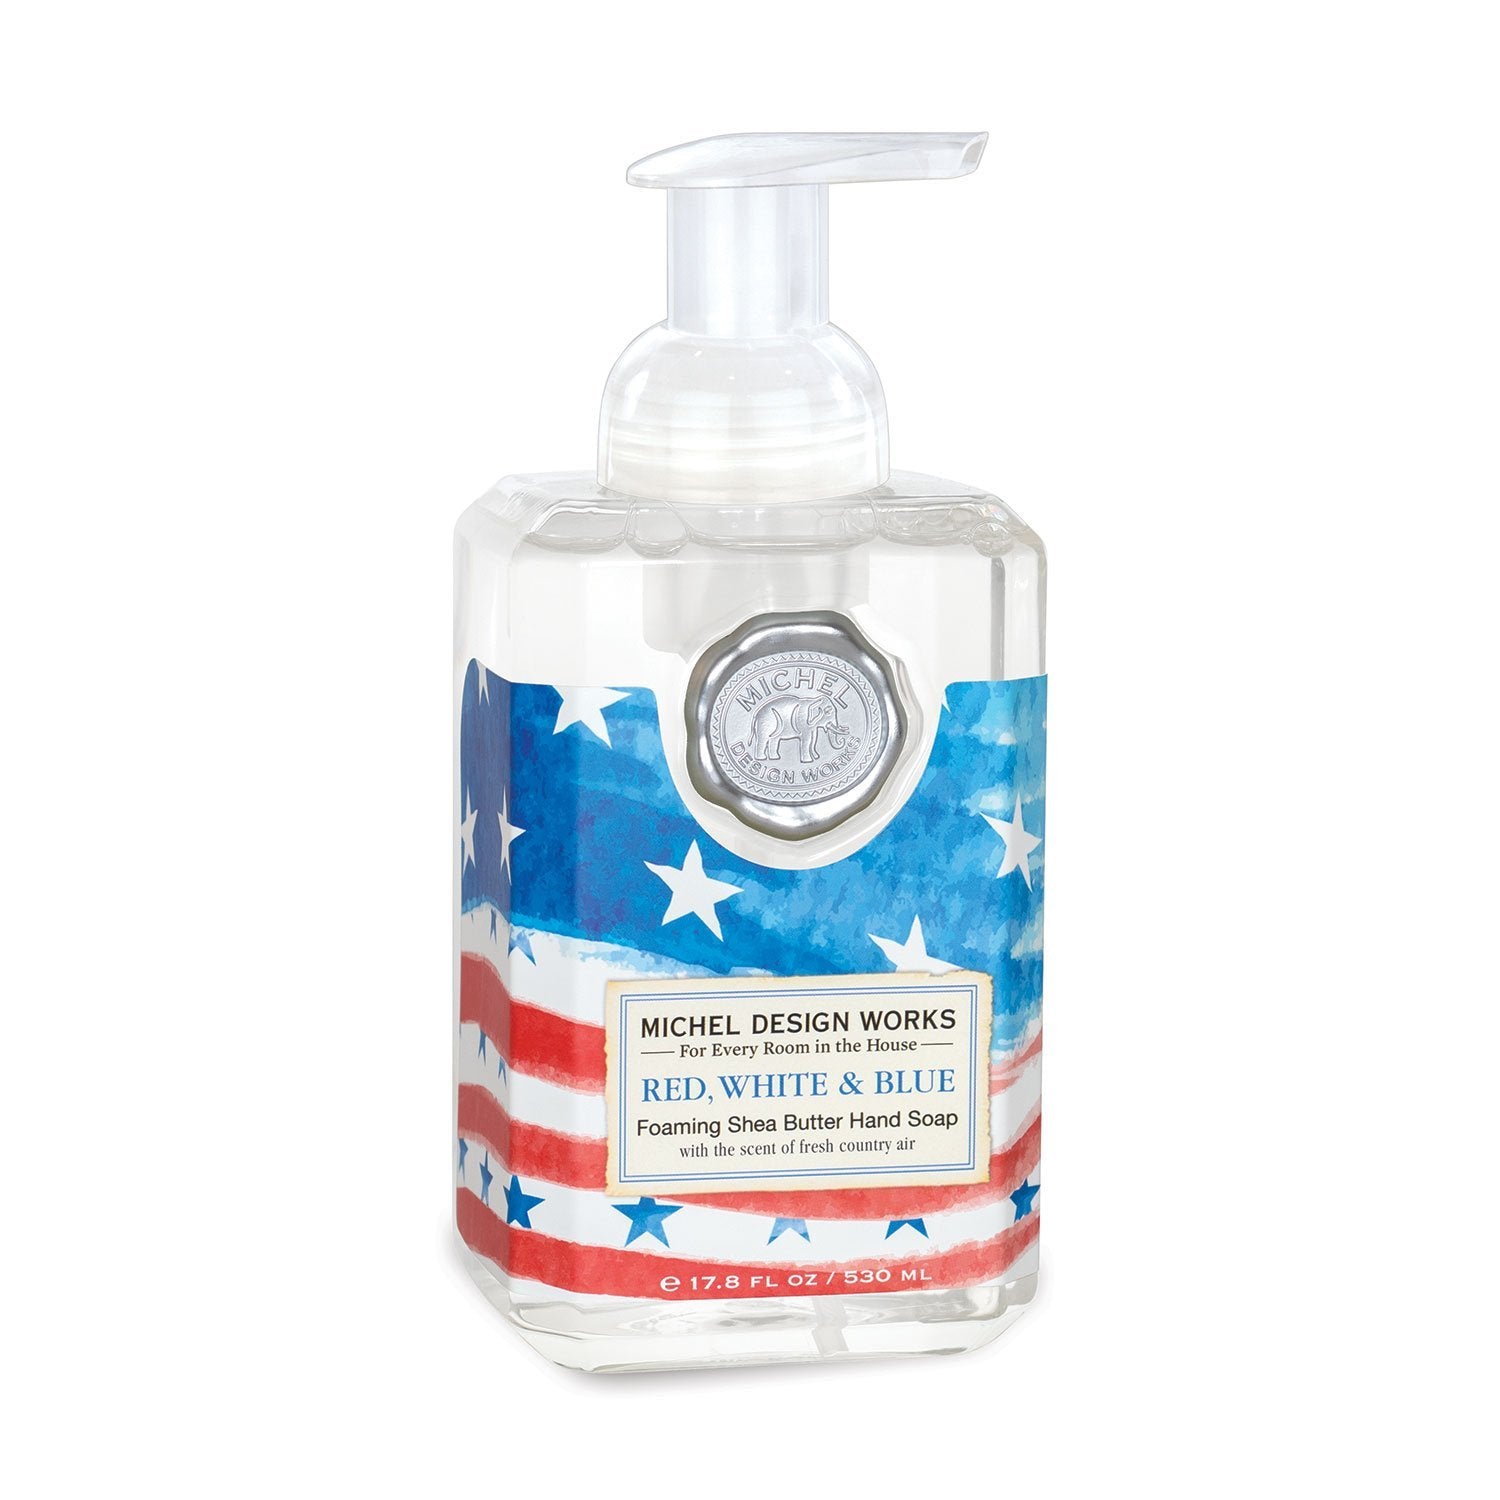 Red, White & Blue - Foaming Hand Soap    